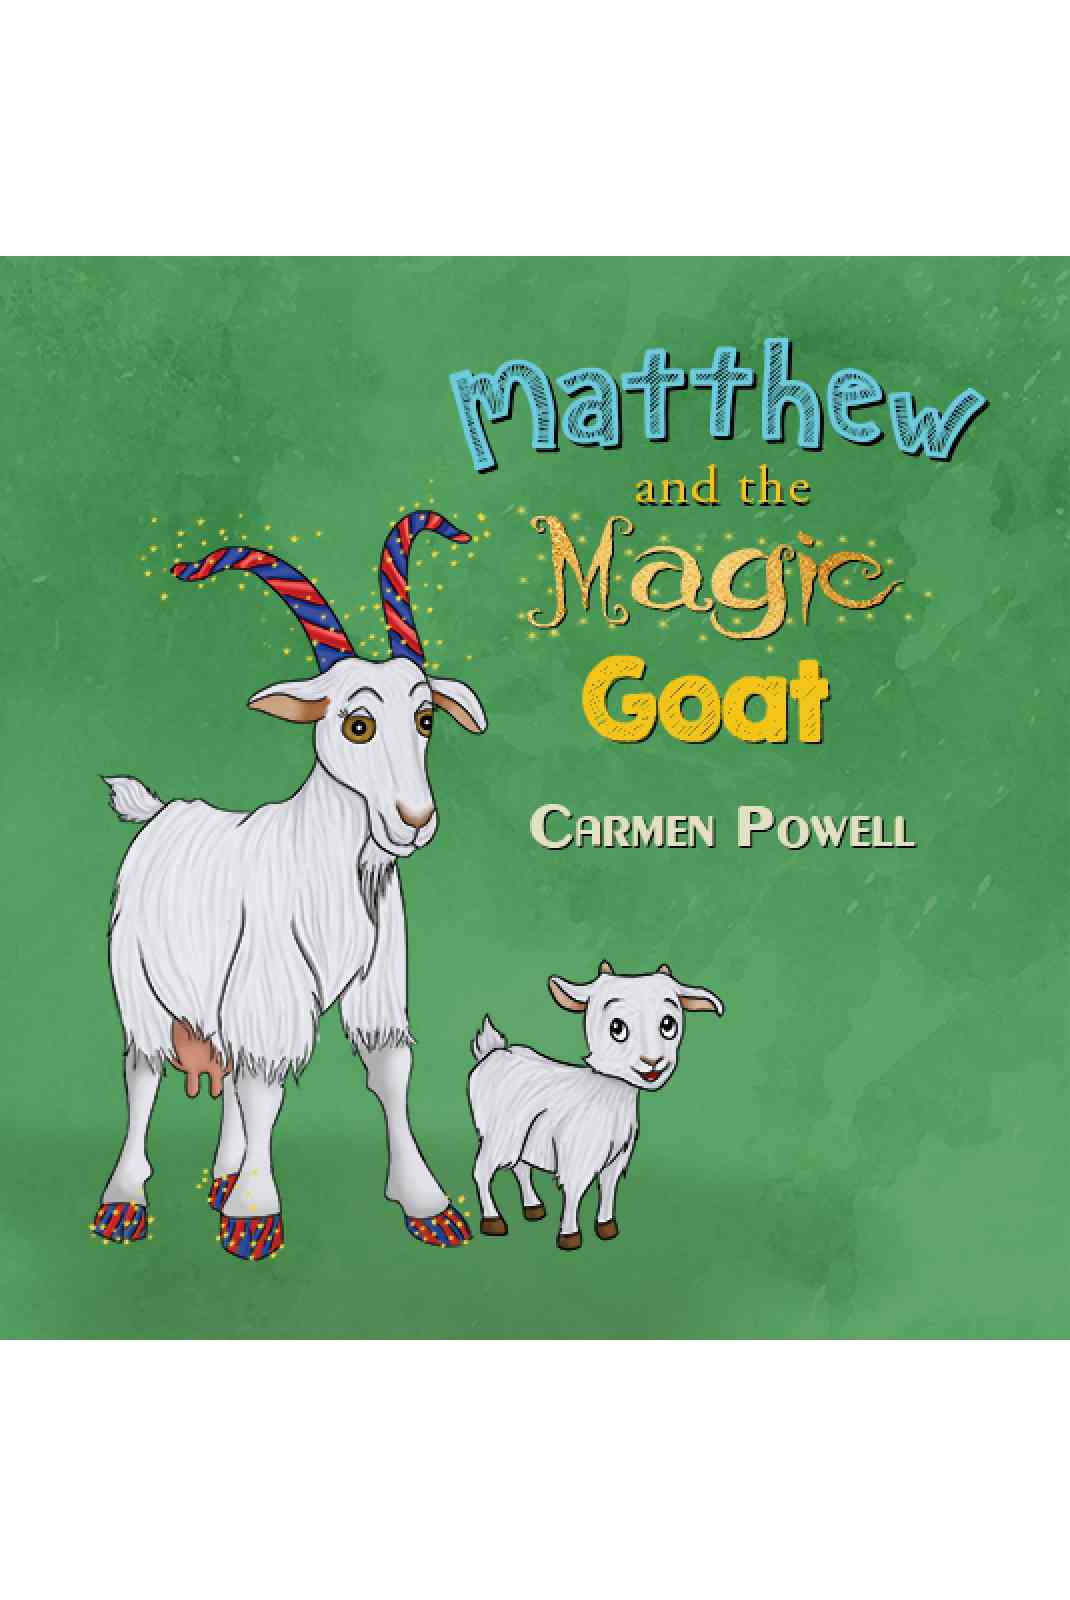 Carmen Powell, the Author of Matthew and the Magic Goat, Received a Prosthetic Leg as a Donation